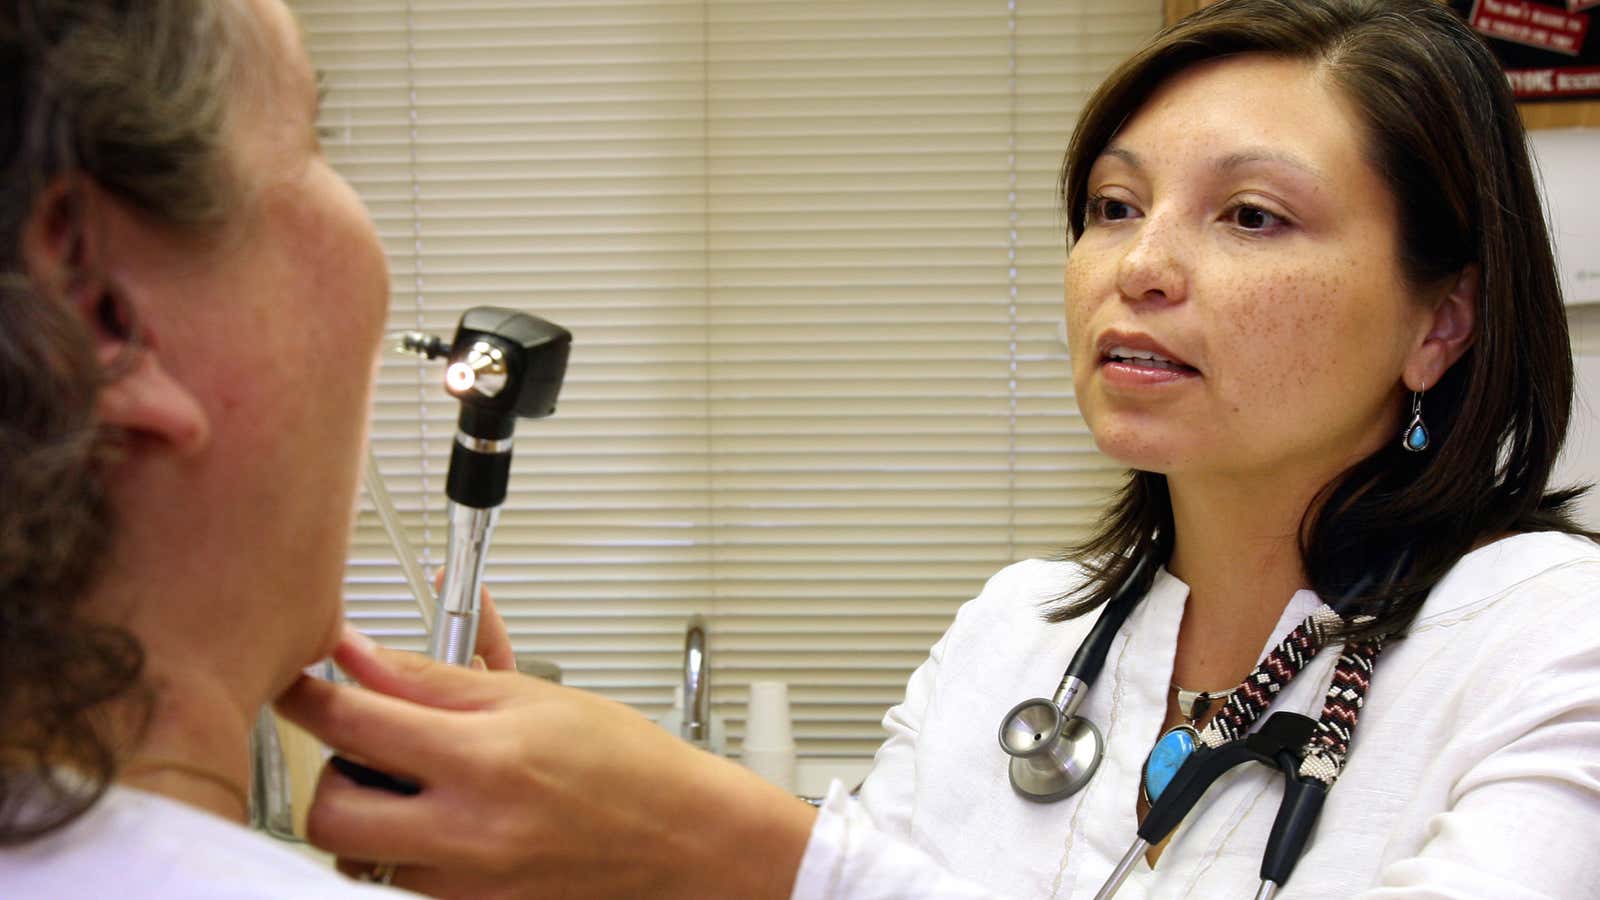 For many American adults, having a primary-care doctor just isn’t realistic.